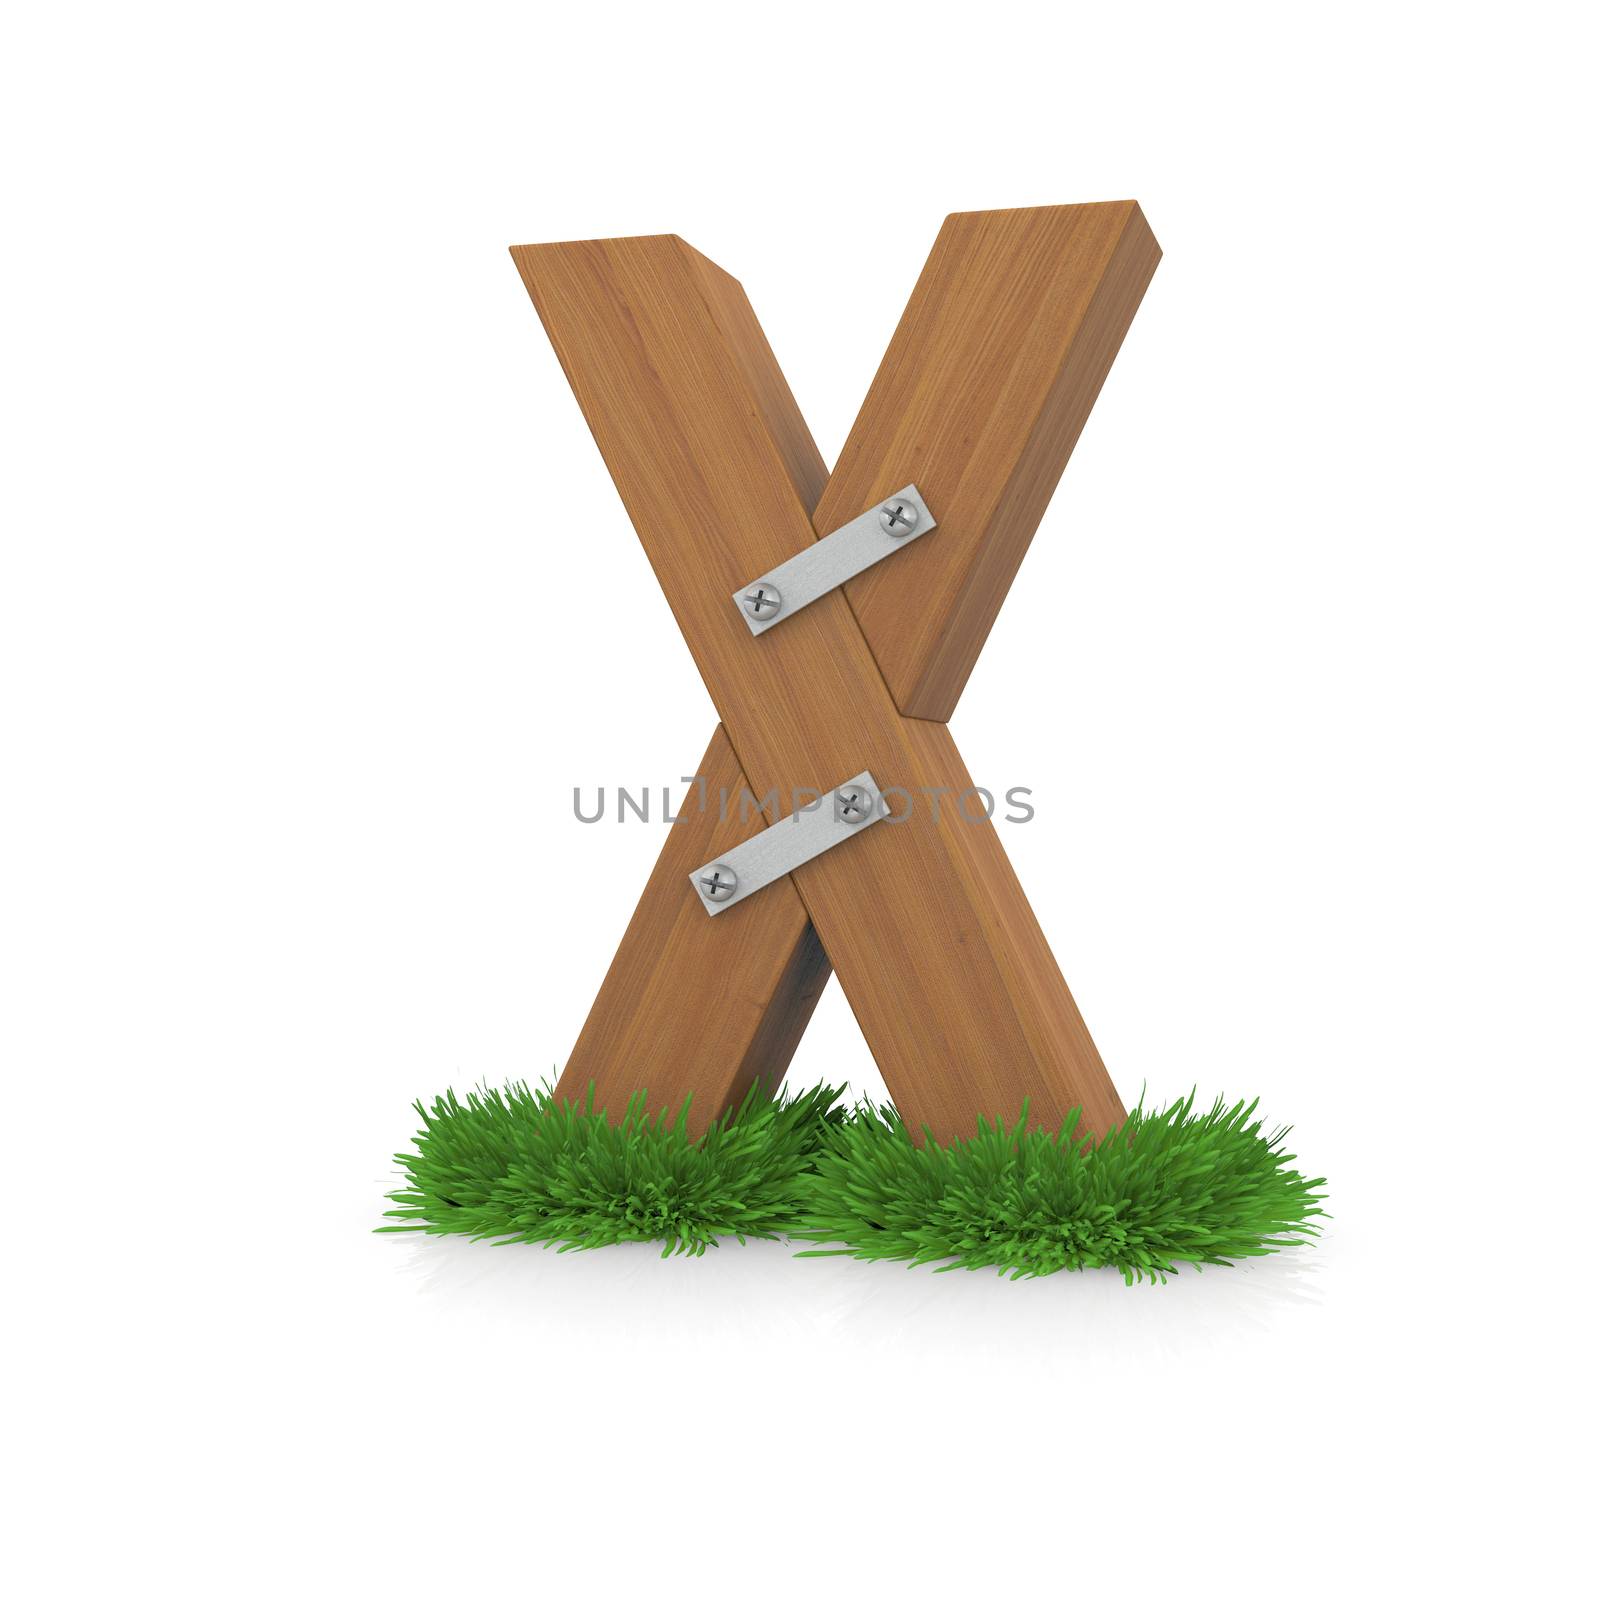 Wooden letter X in the grass. Isolated render with reflection on white background. bio concept